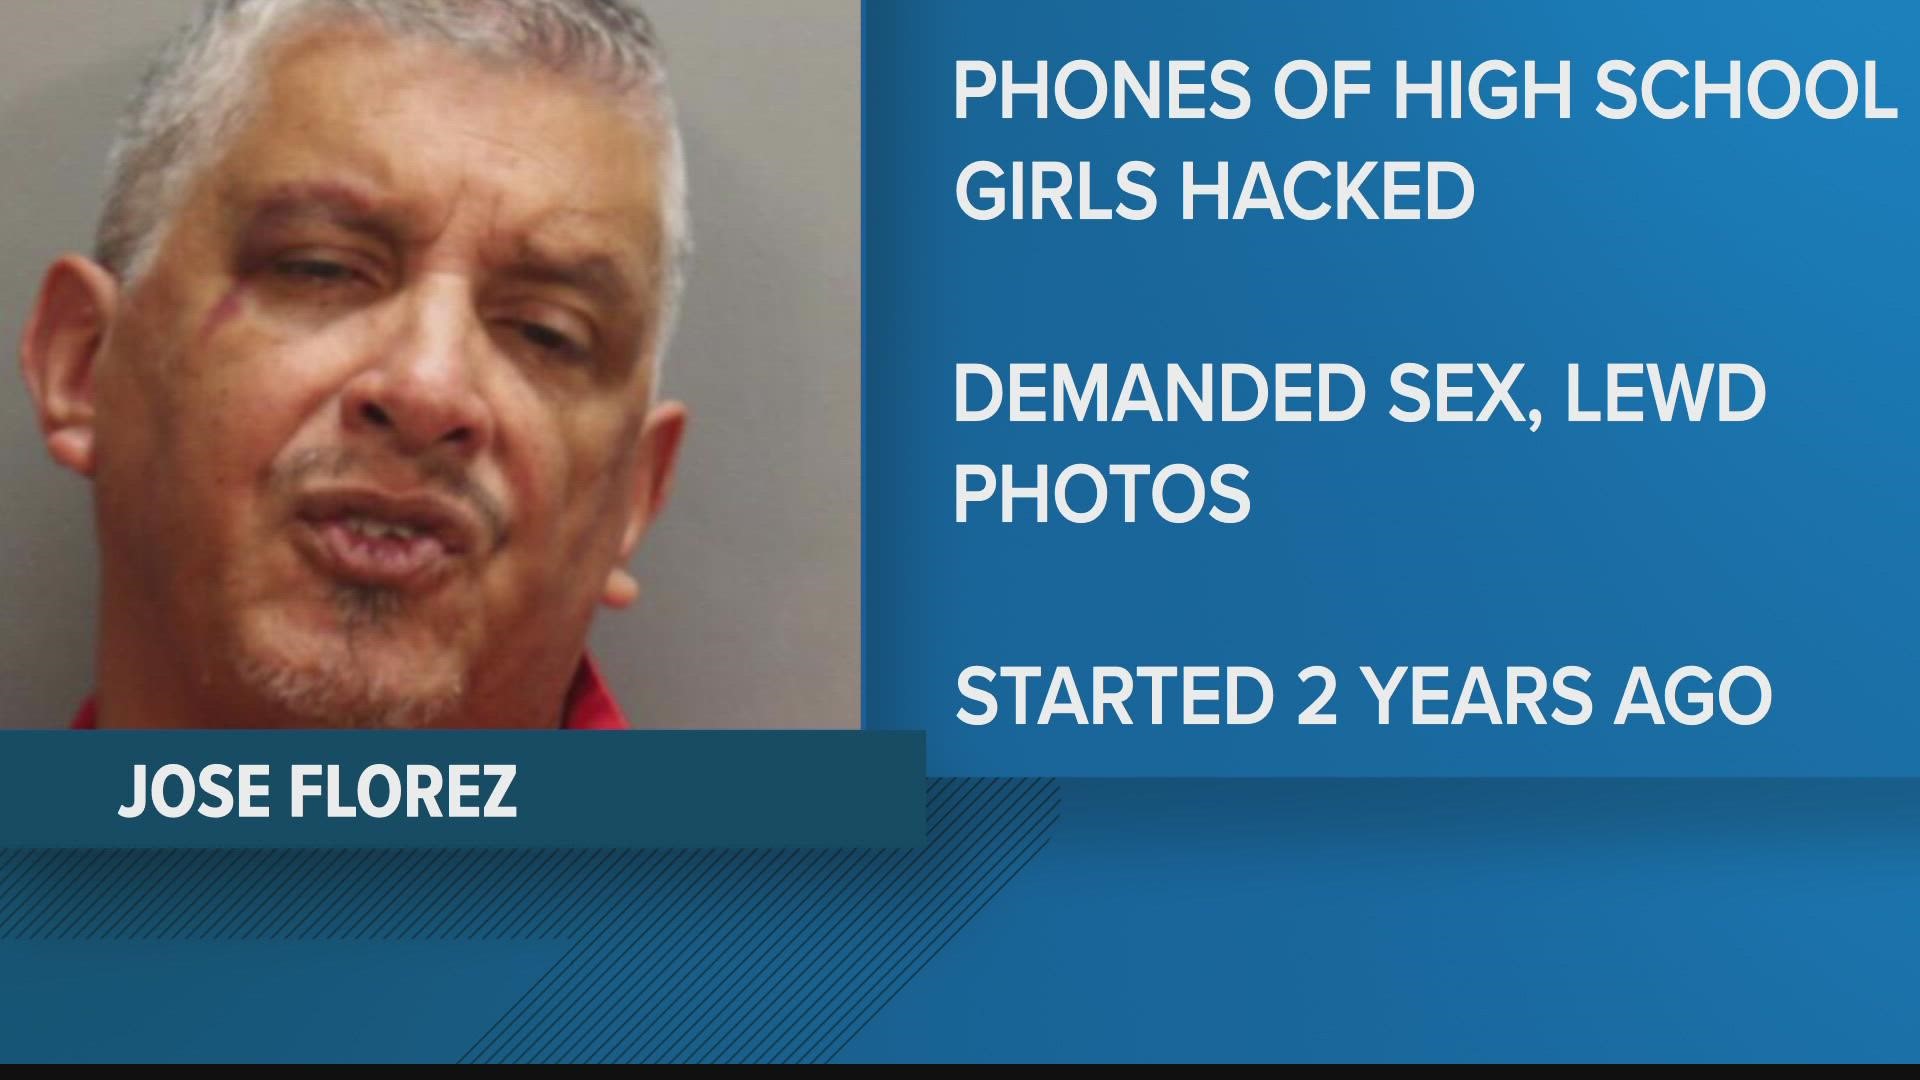 61-year-old Jose Manuel Pinto Florez hacked the phones of high school girls, threatening them and demanding sex or lewd photographs.